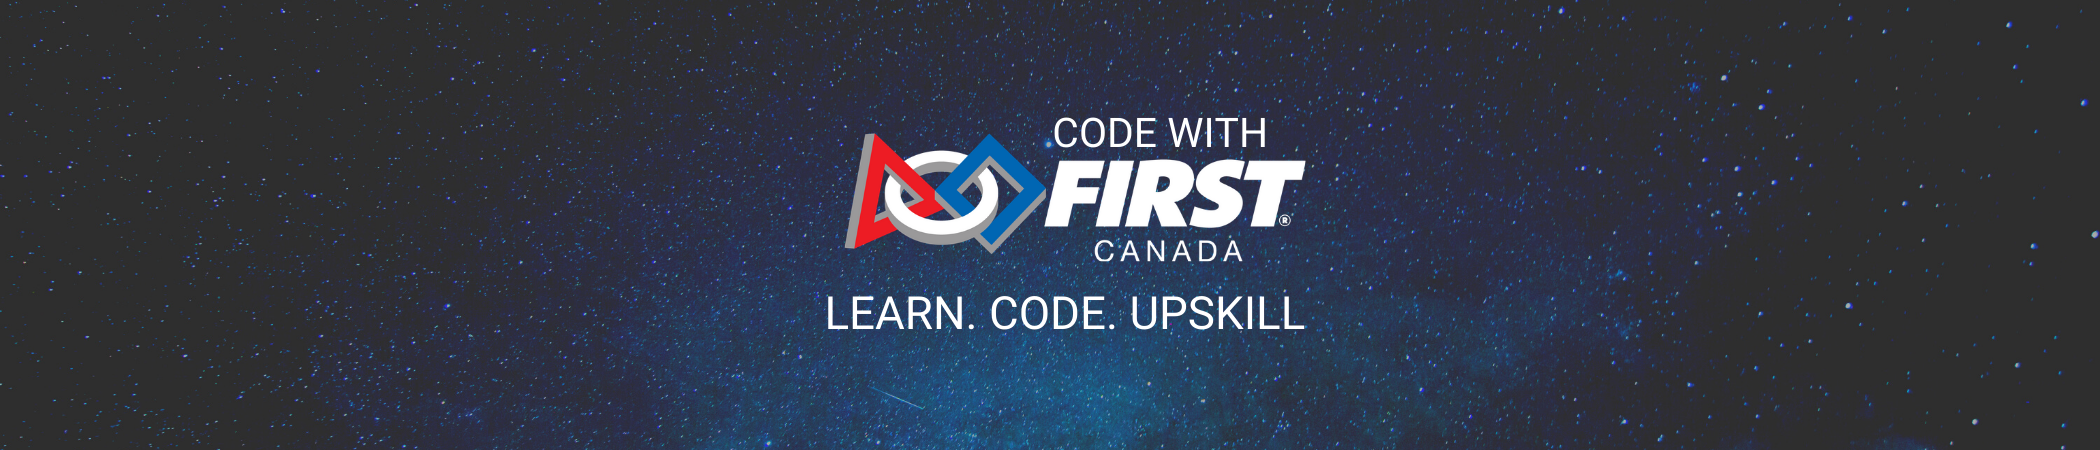 Code with FIRST Canada